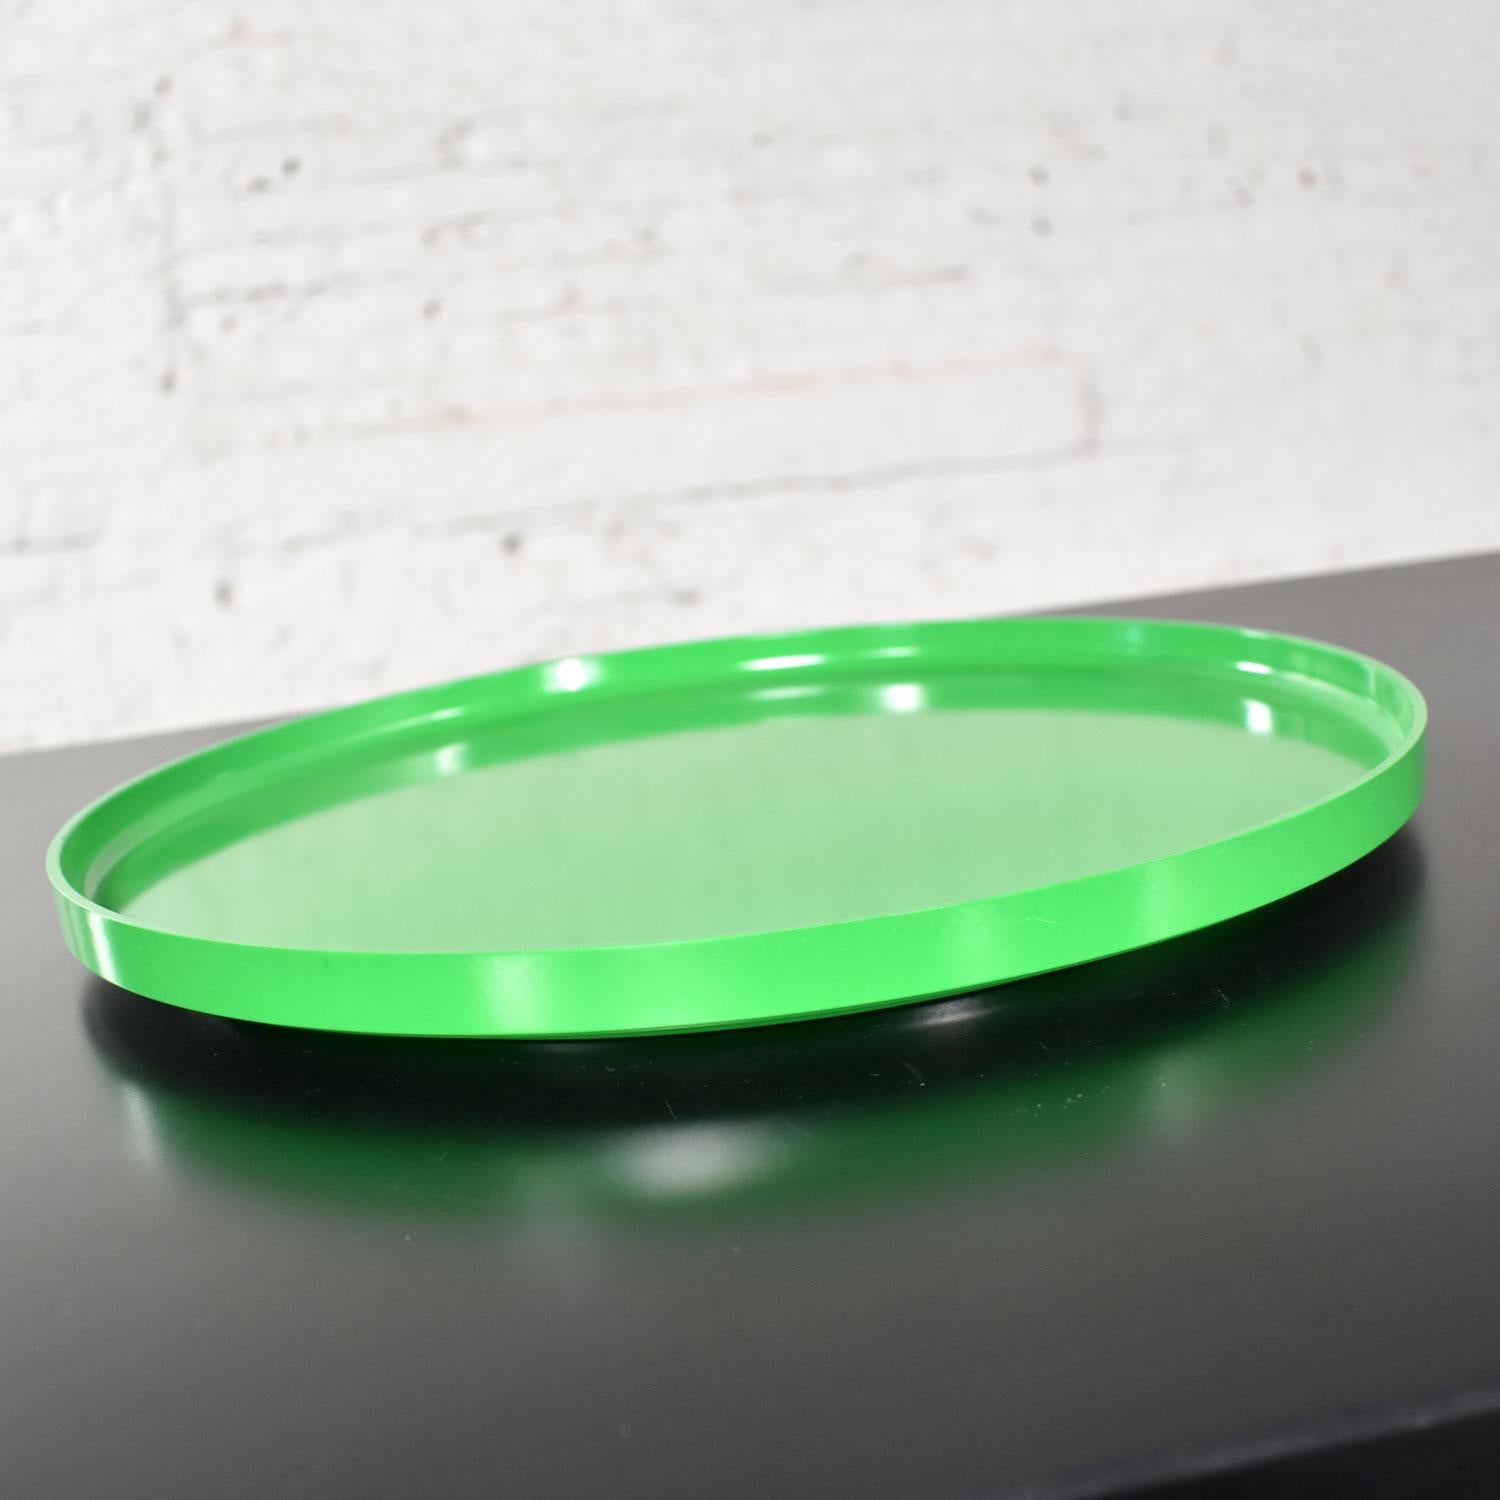 20th Century Heller Dinnerware by Lella & Massimo Vignelli in Kelly Green 58 Pieces & Napkins